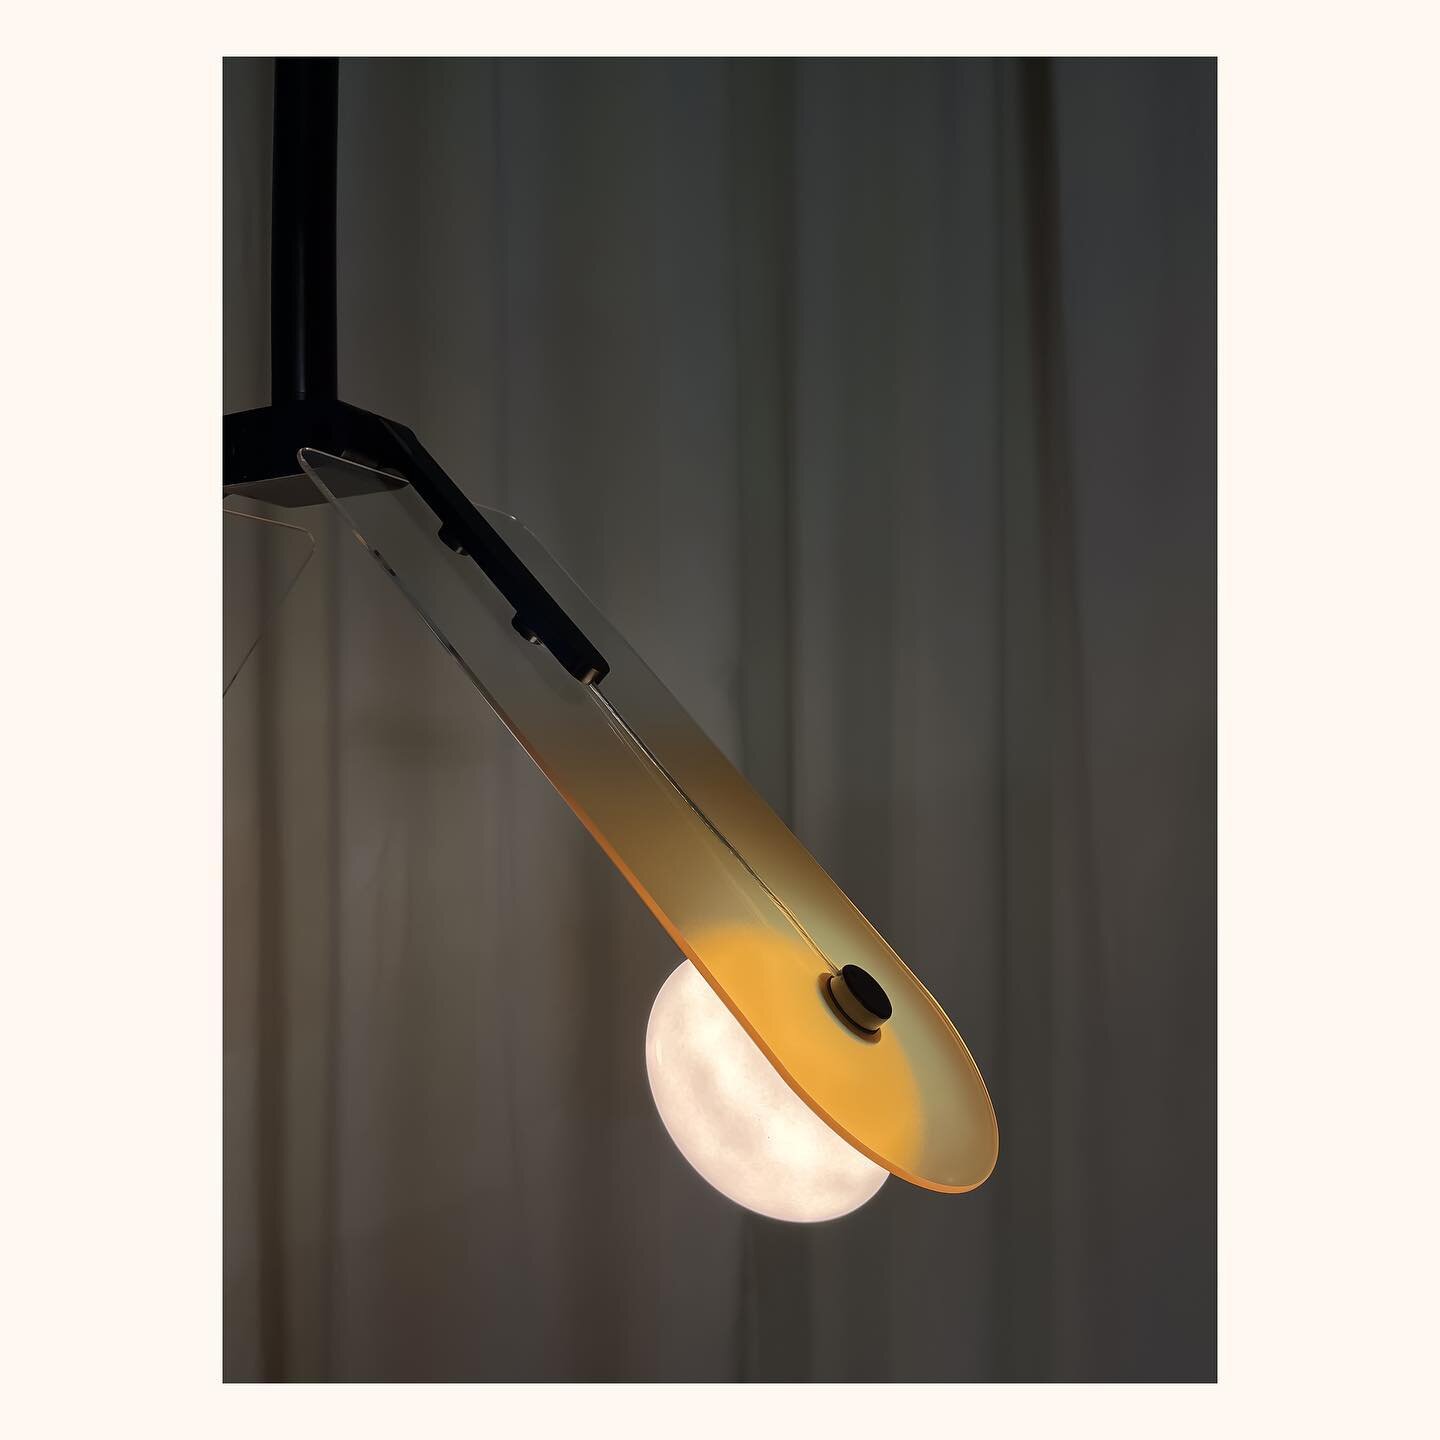 CHRYSALIS in Honey Amber Black Anodised Finish - Detail🦋✨

The fixture boasts a pair of adjustable ombr&eacute;-coloured glass wings, casting a captivating interplay of light and shadow. Its warm, opal ellipsoids emit a gentle, inviting glow.

Drawn